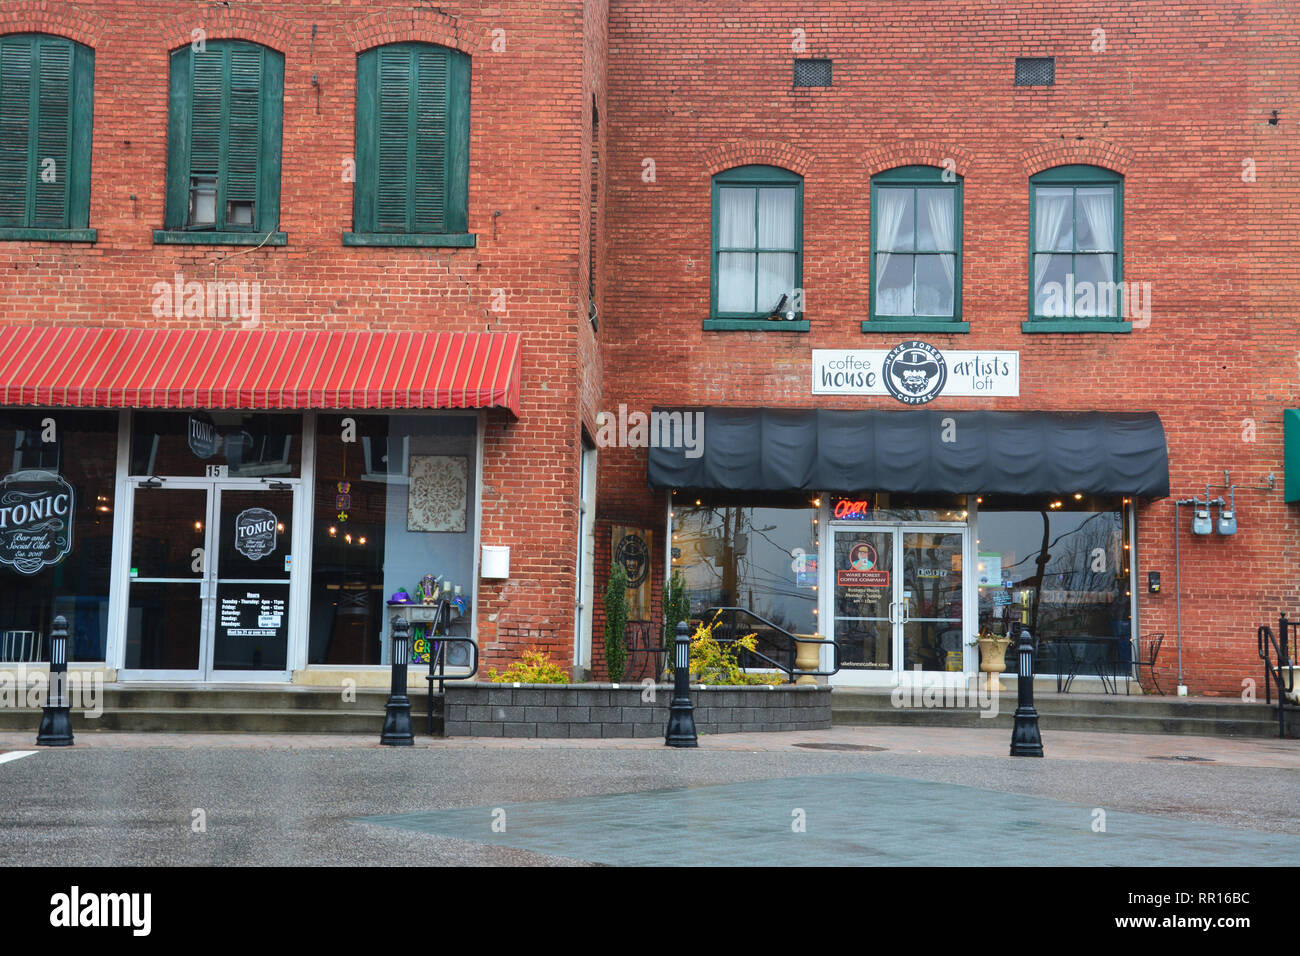 A rainy morning keeps shoppers away in the business district of historic downtown Wake Forest, North Carolina. Stock Photo